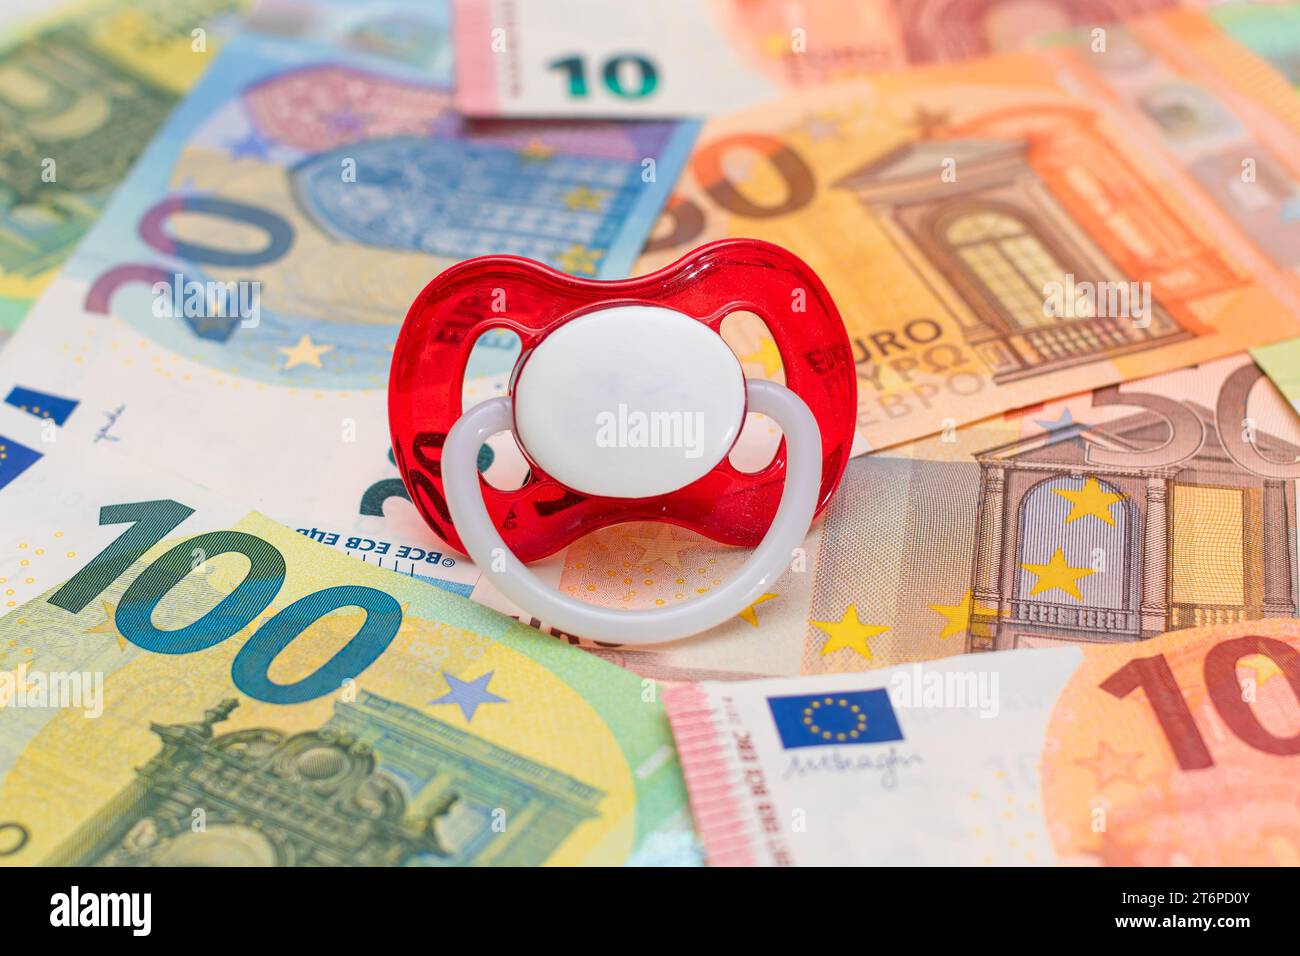 Childfree, Contraception and Birth Control Concept: Baby Pacifier on the Euro Banknotes. Having Children is Expensive and Unprofitable Stock Photo